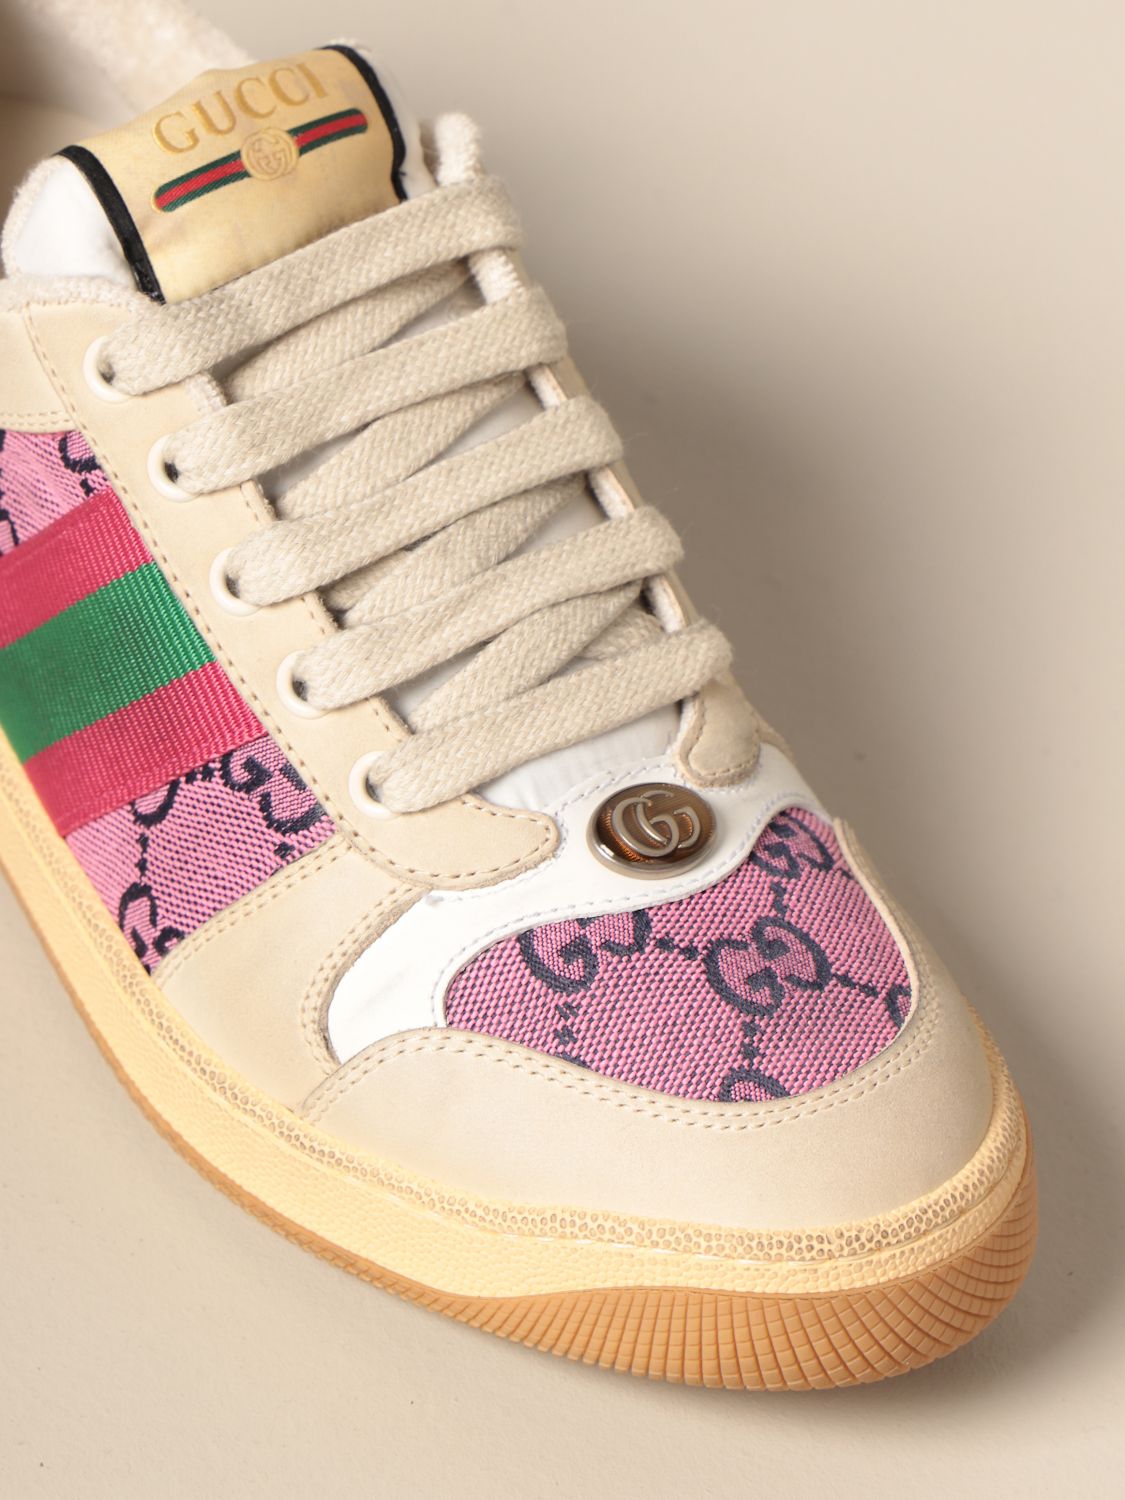 pink gucci tennis shoes